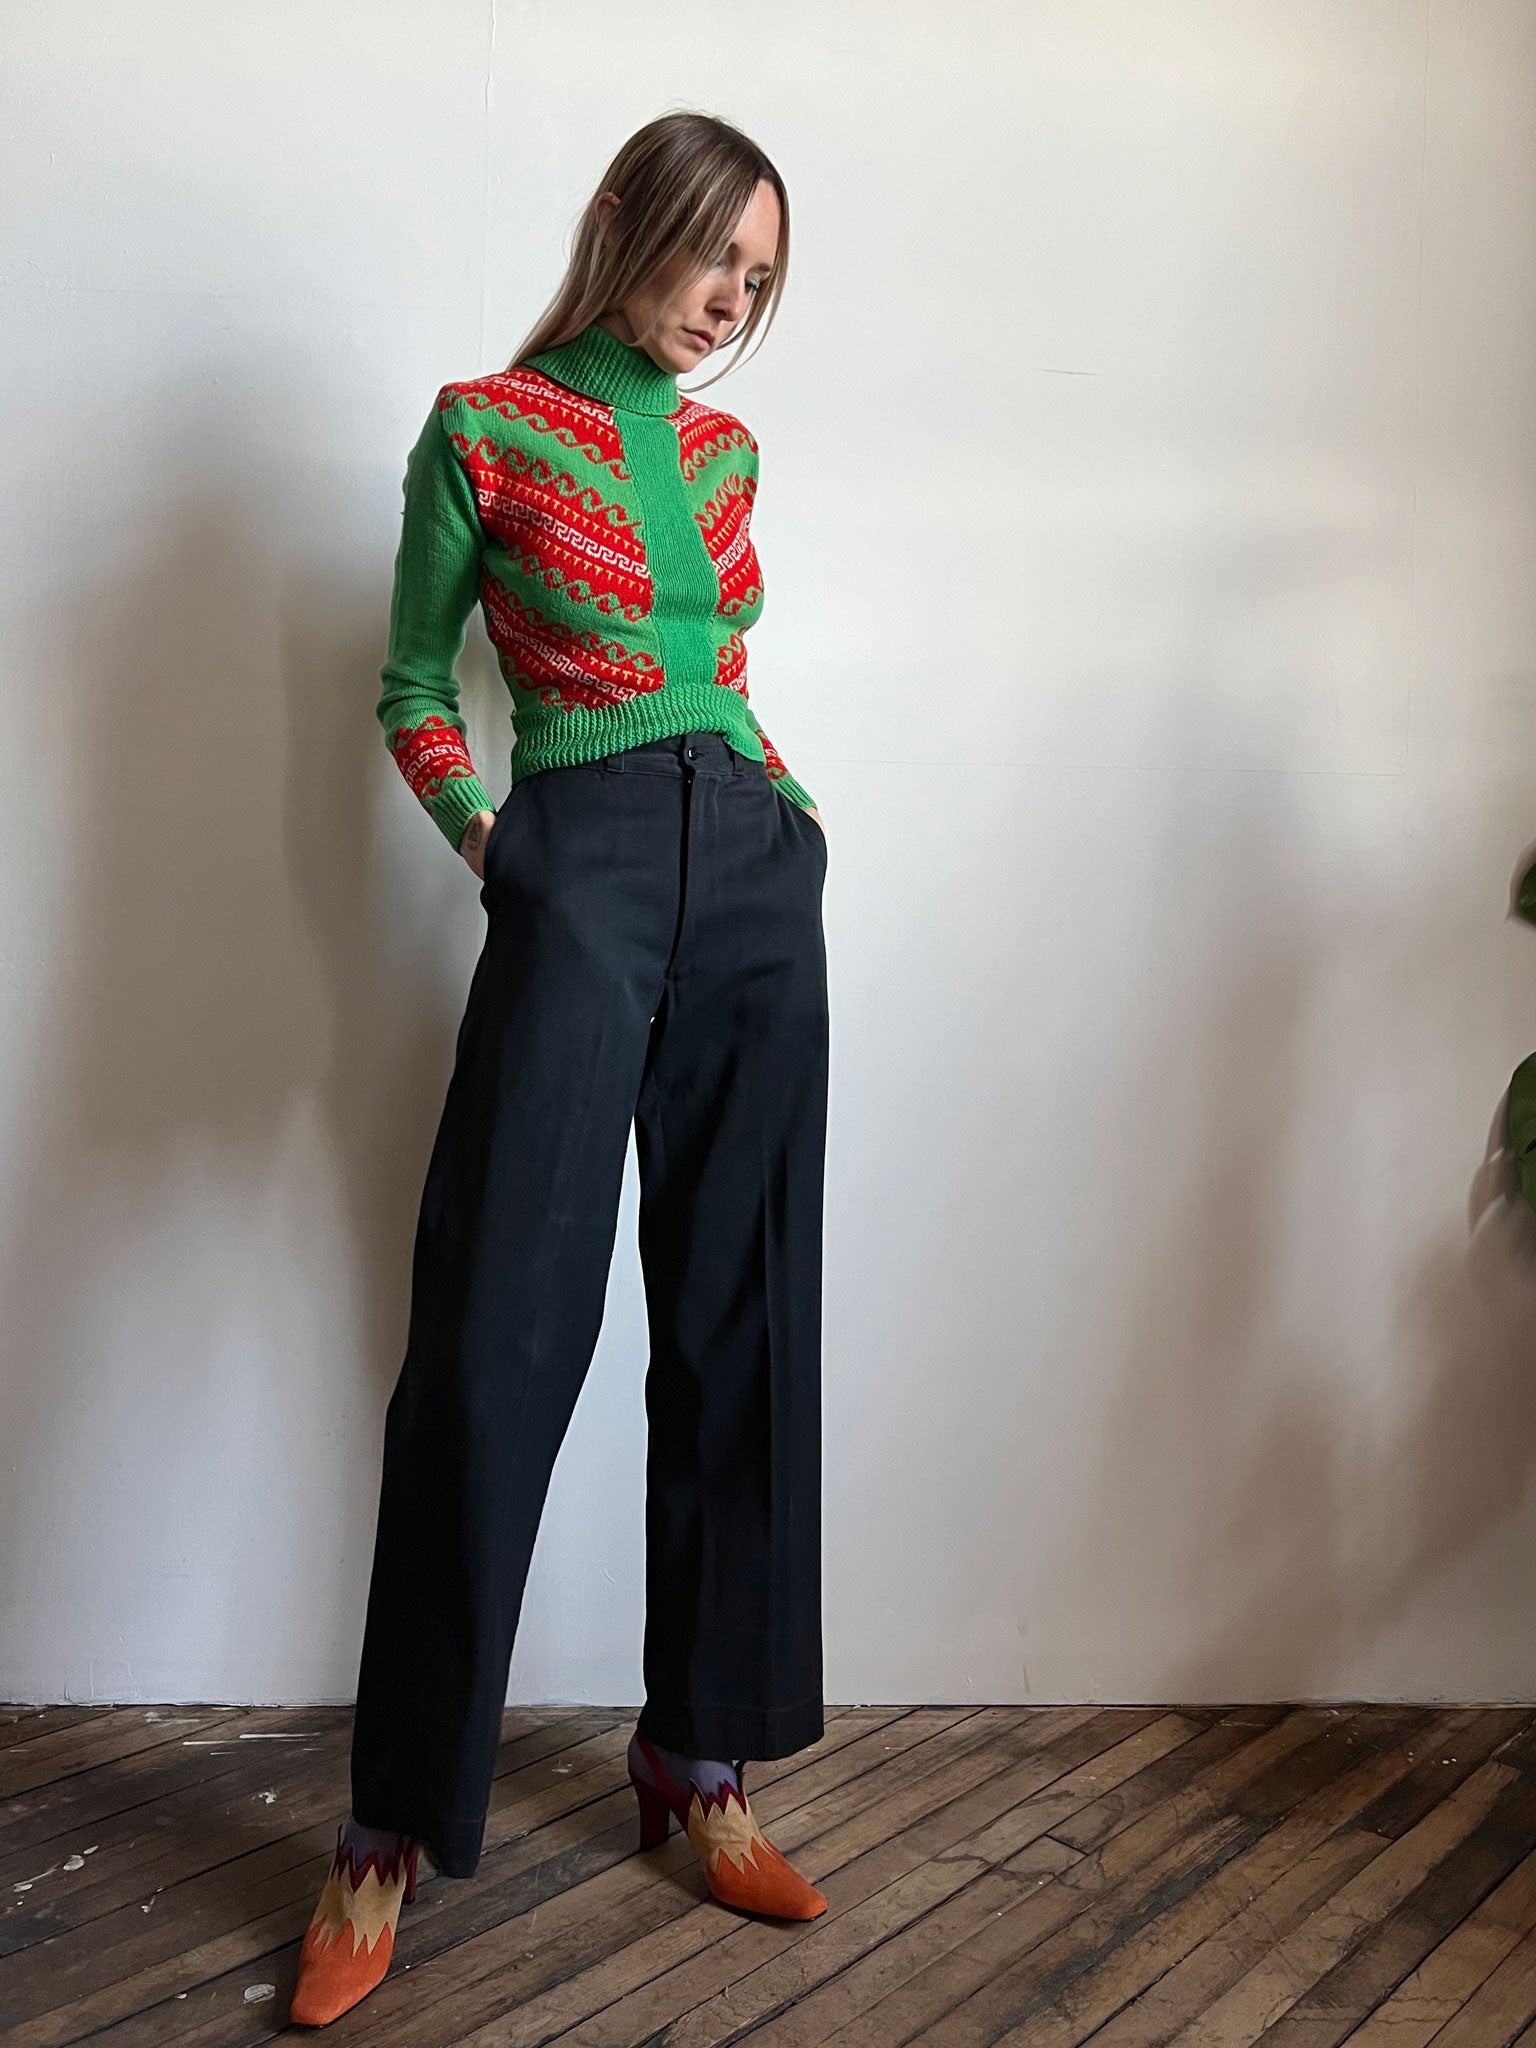 Vintage 1940's Green & Red Hand Knit Wool Sweater with Celluloid Zipper and Buttons